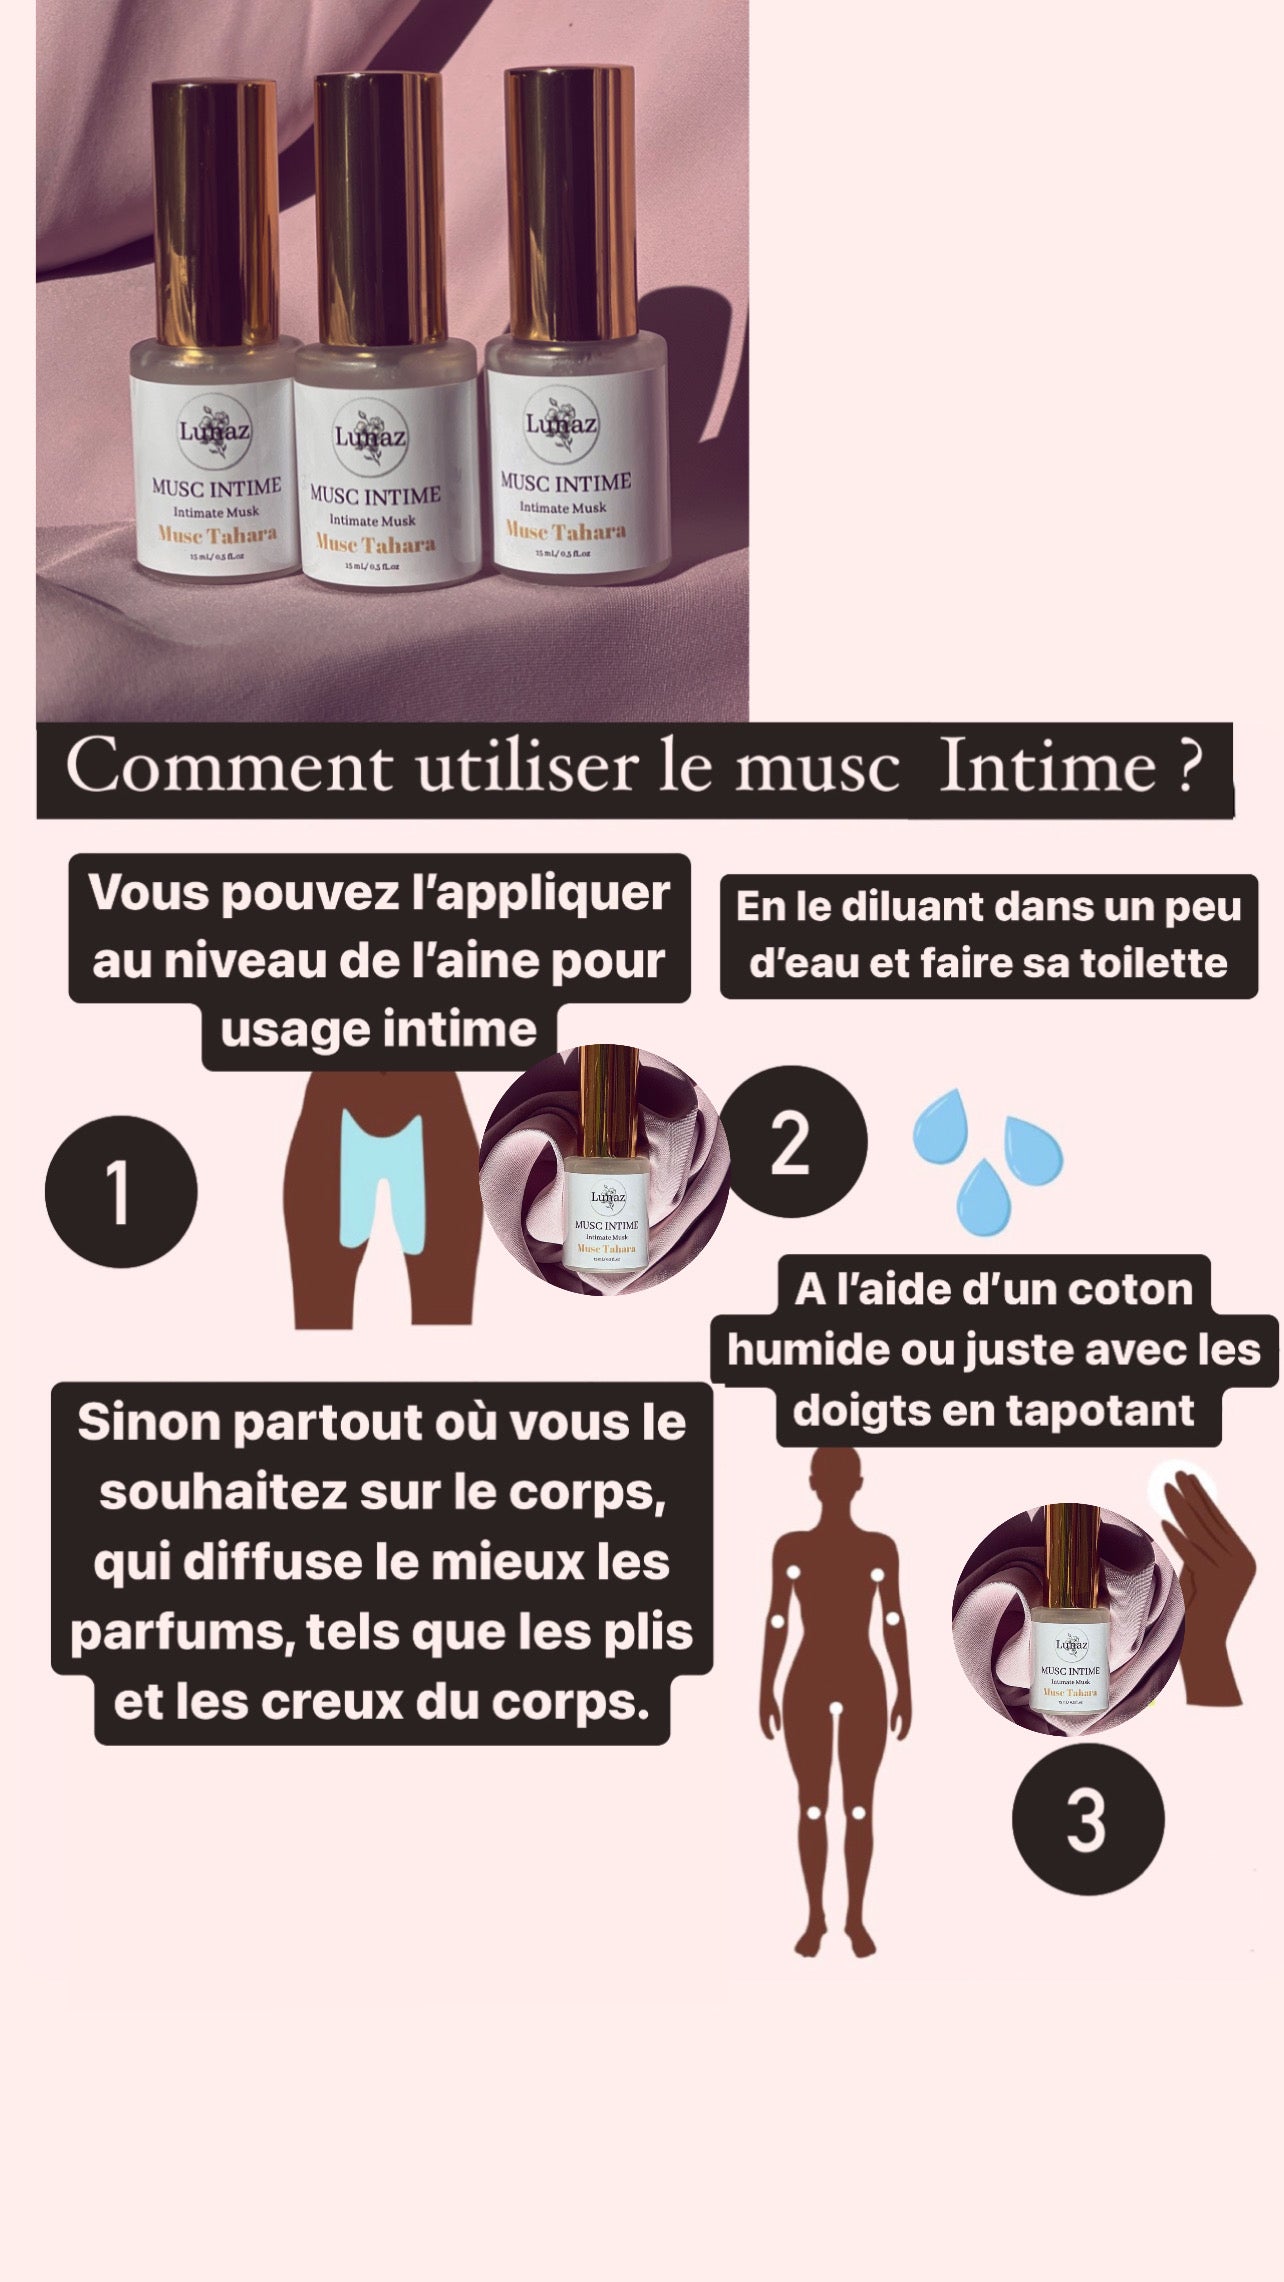 Musc intime